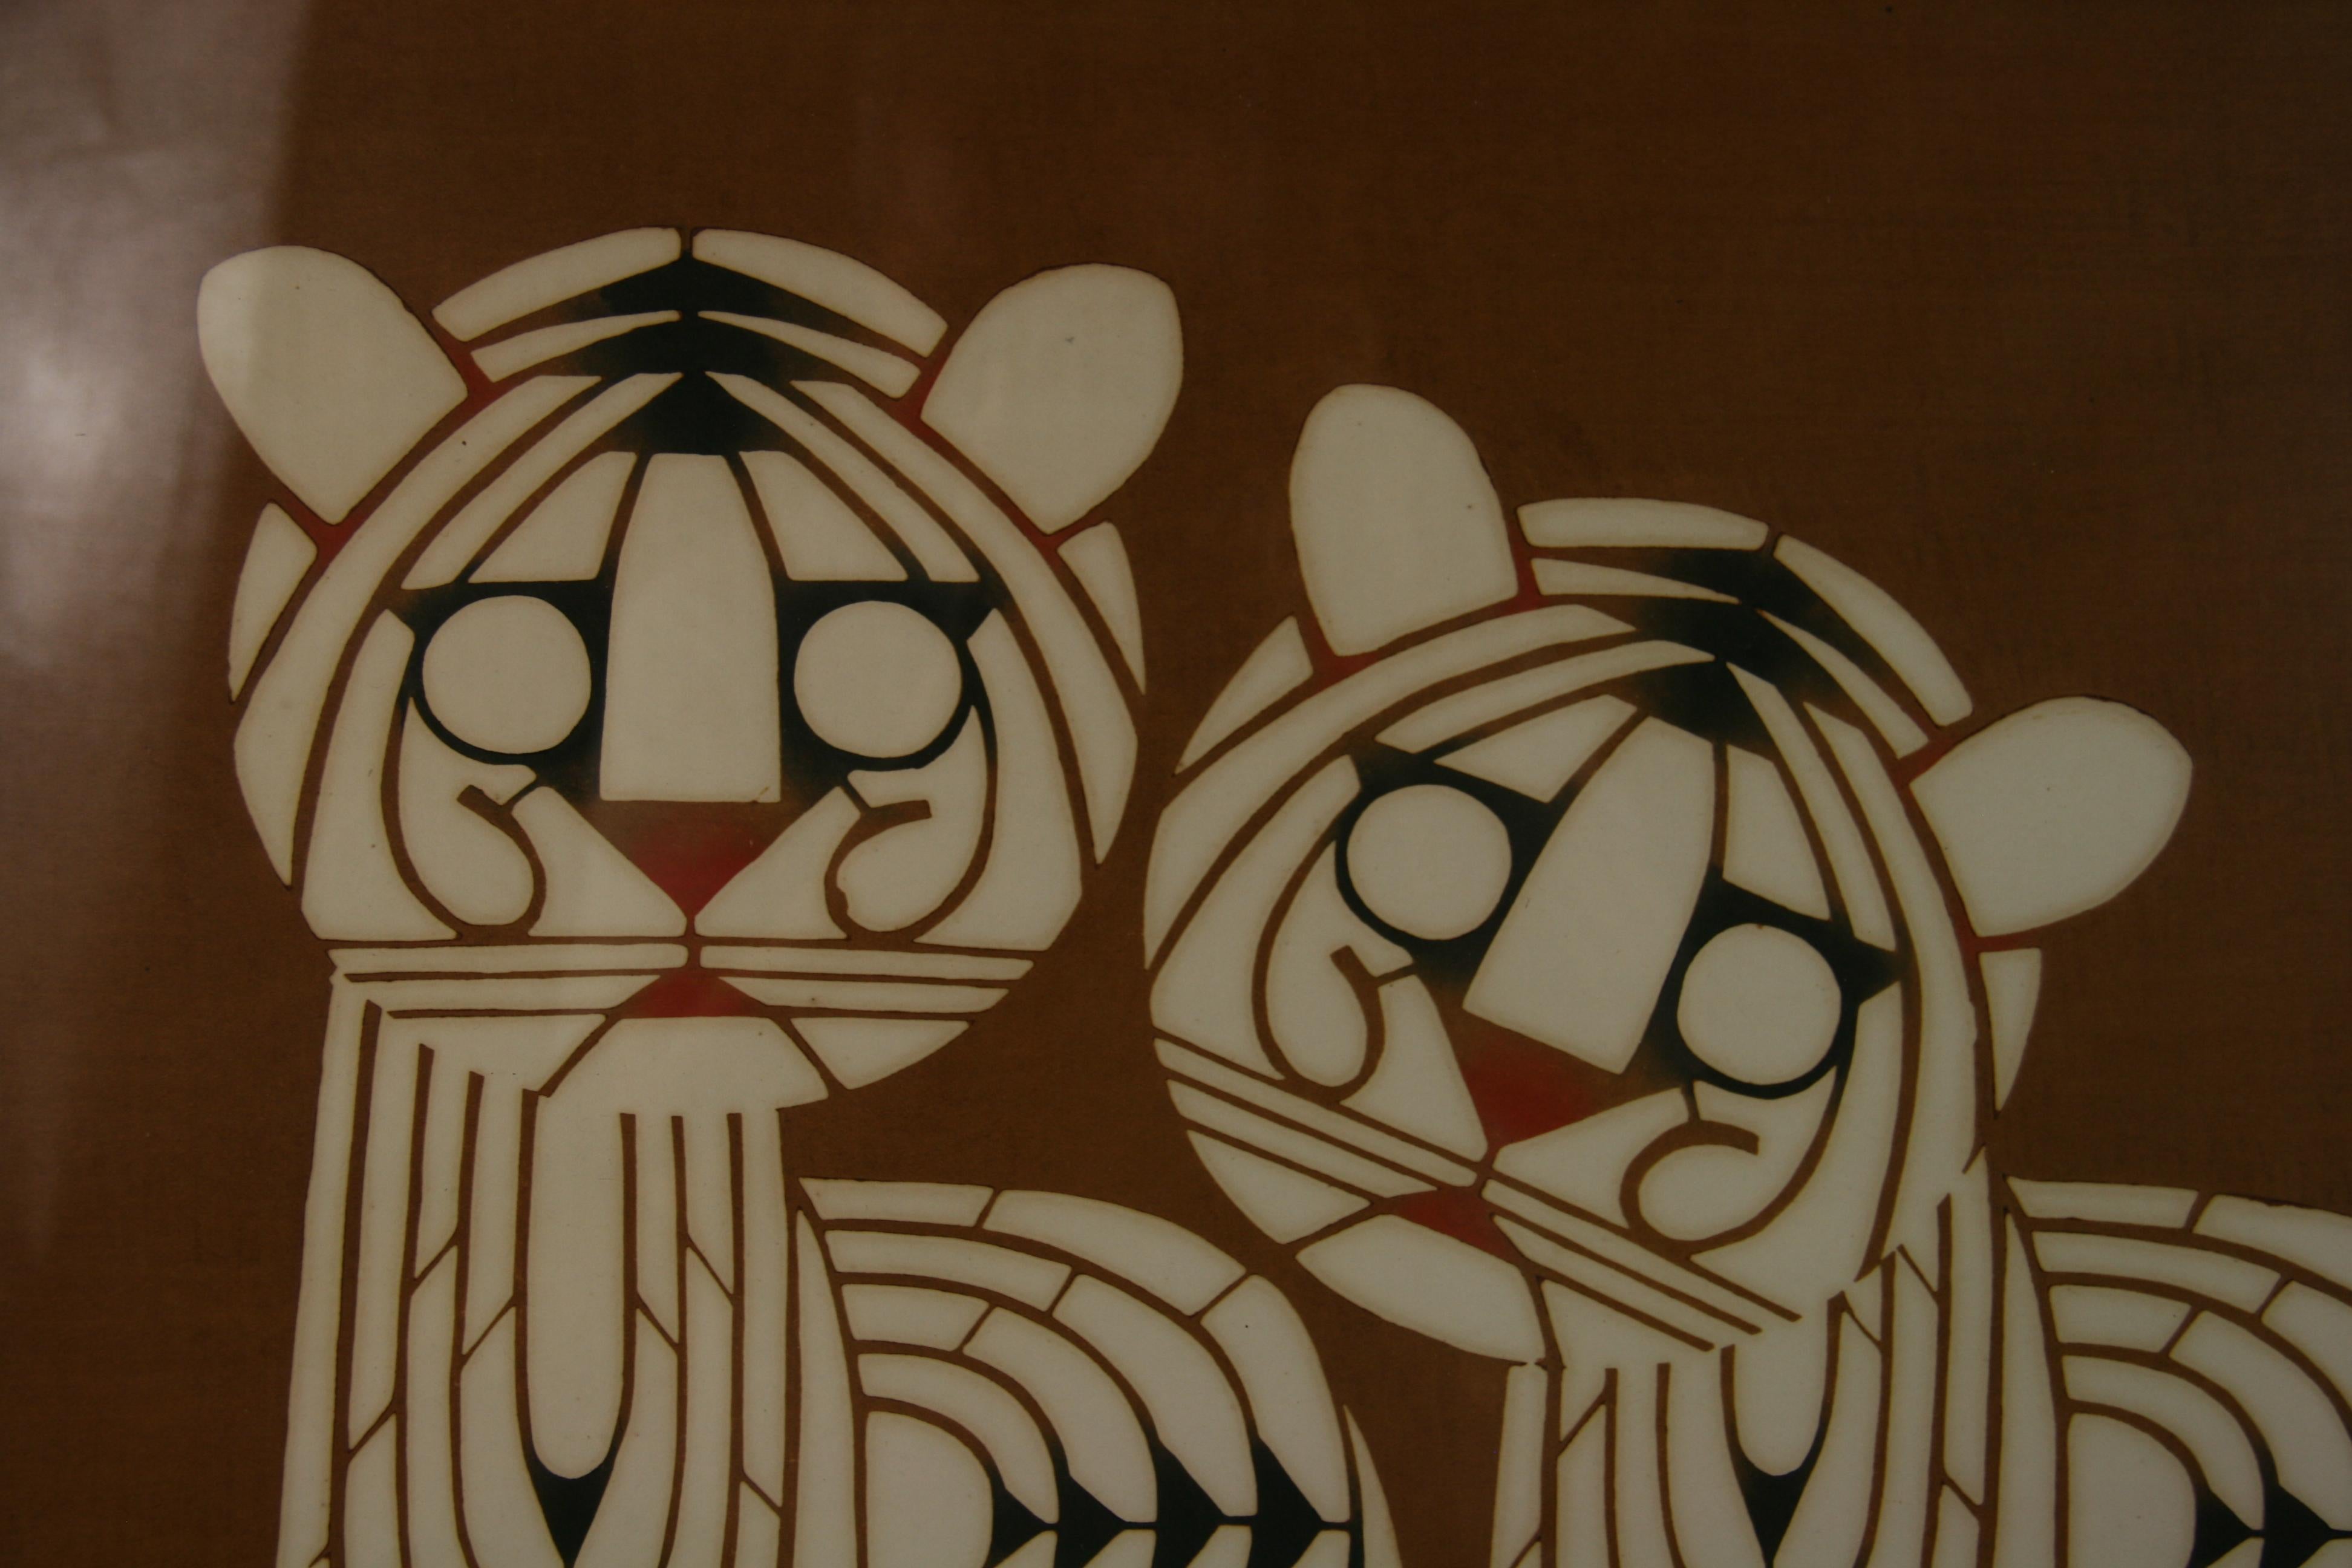 Japanese Two Tigers Serigraph #5 By Inikumo 1967 2